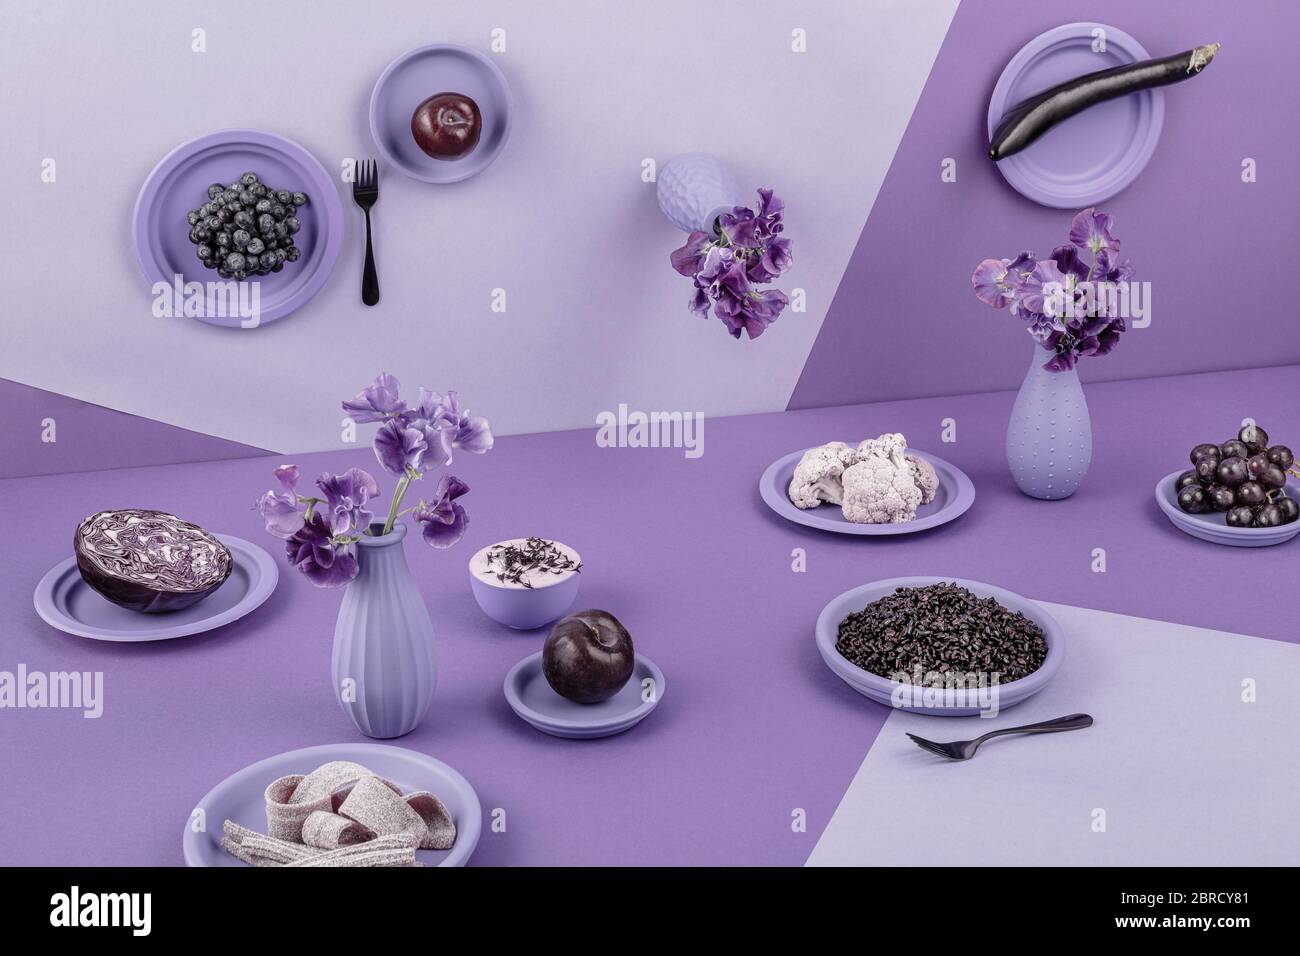 Laid table in violet, perspective, surreal, eggplant, red cabbage, rice, yogurt, grapes, apple, flowers, cauliflower, still life, food photography Stock Photo